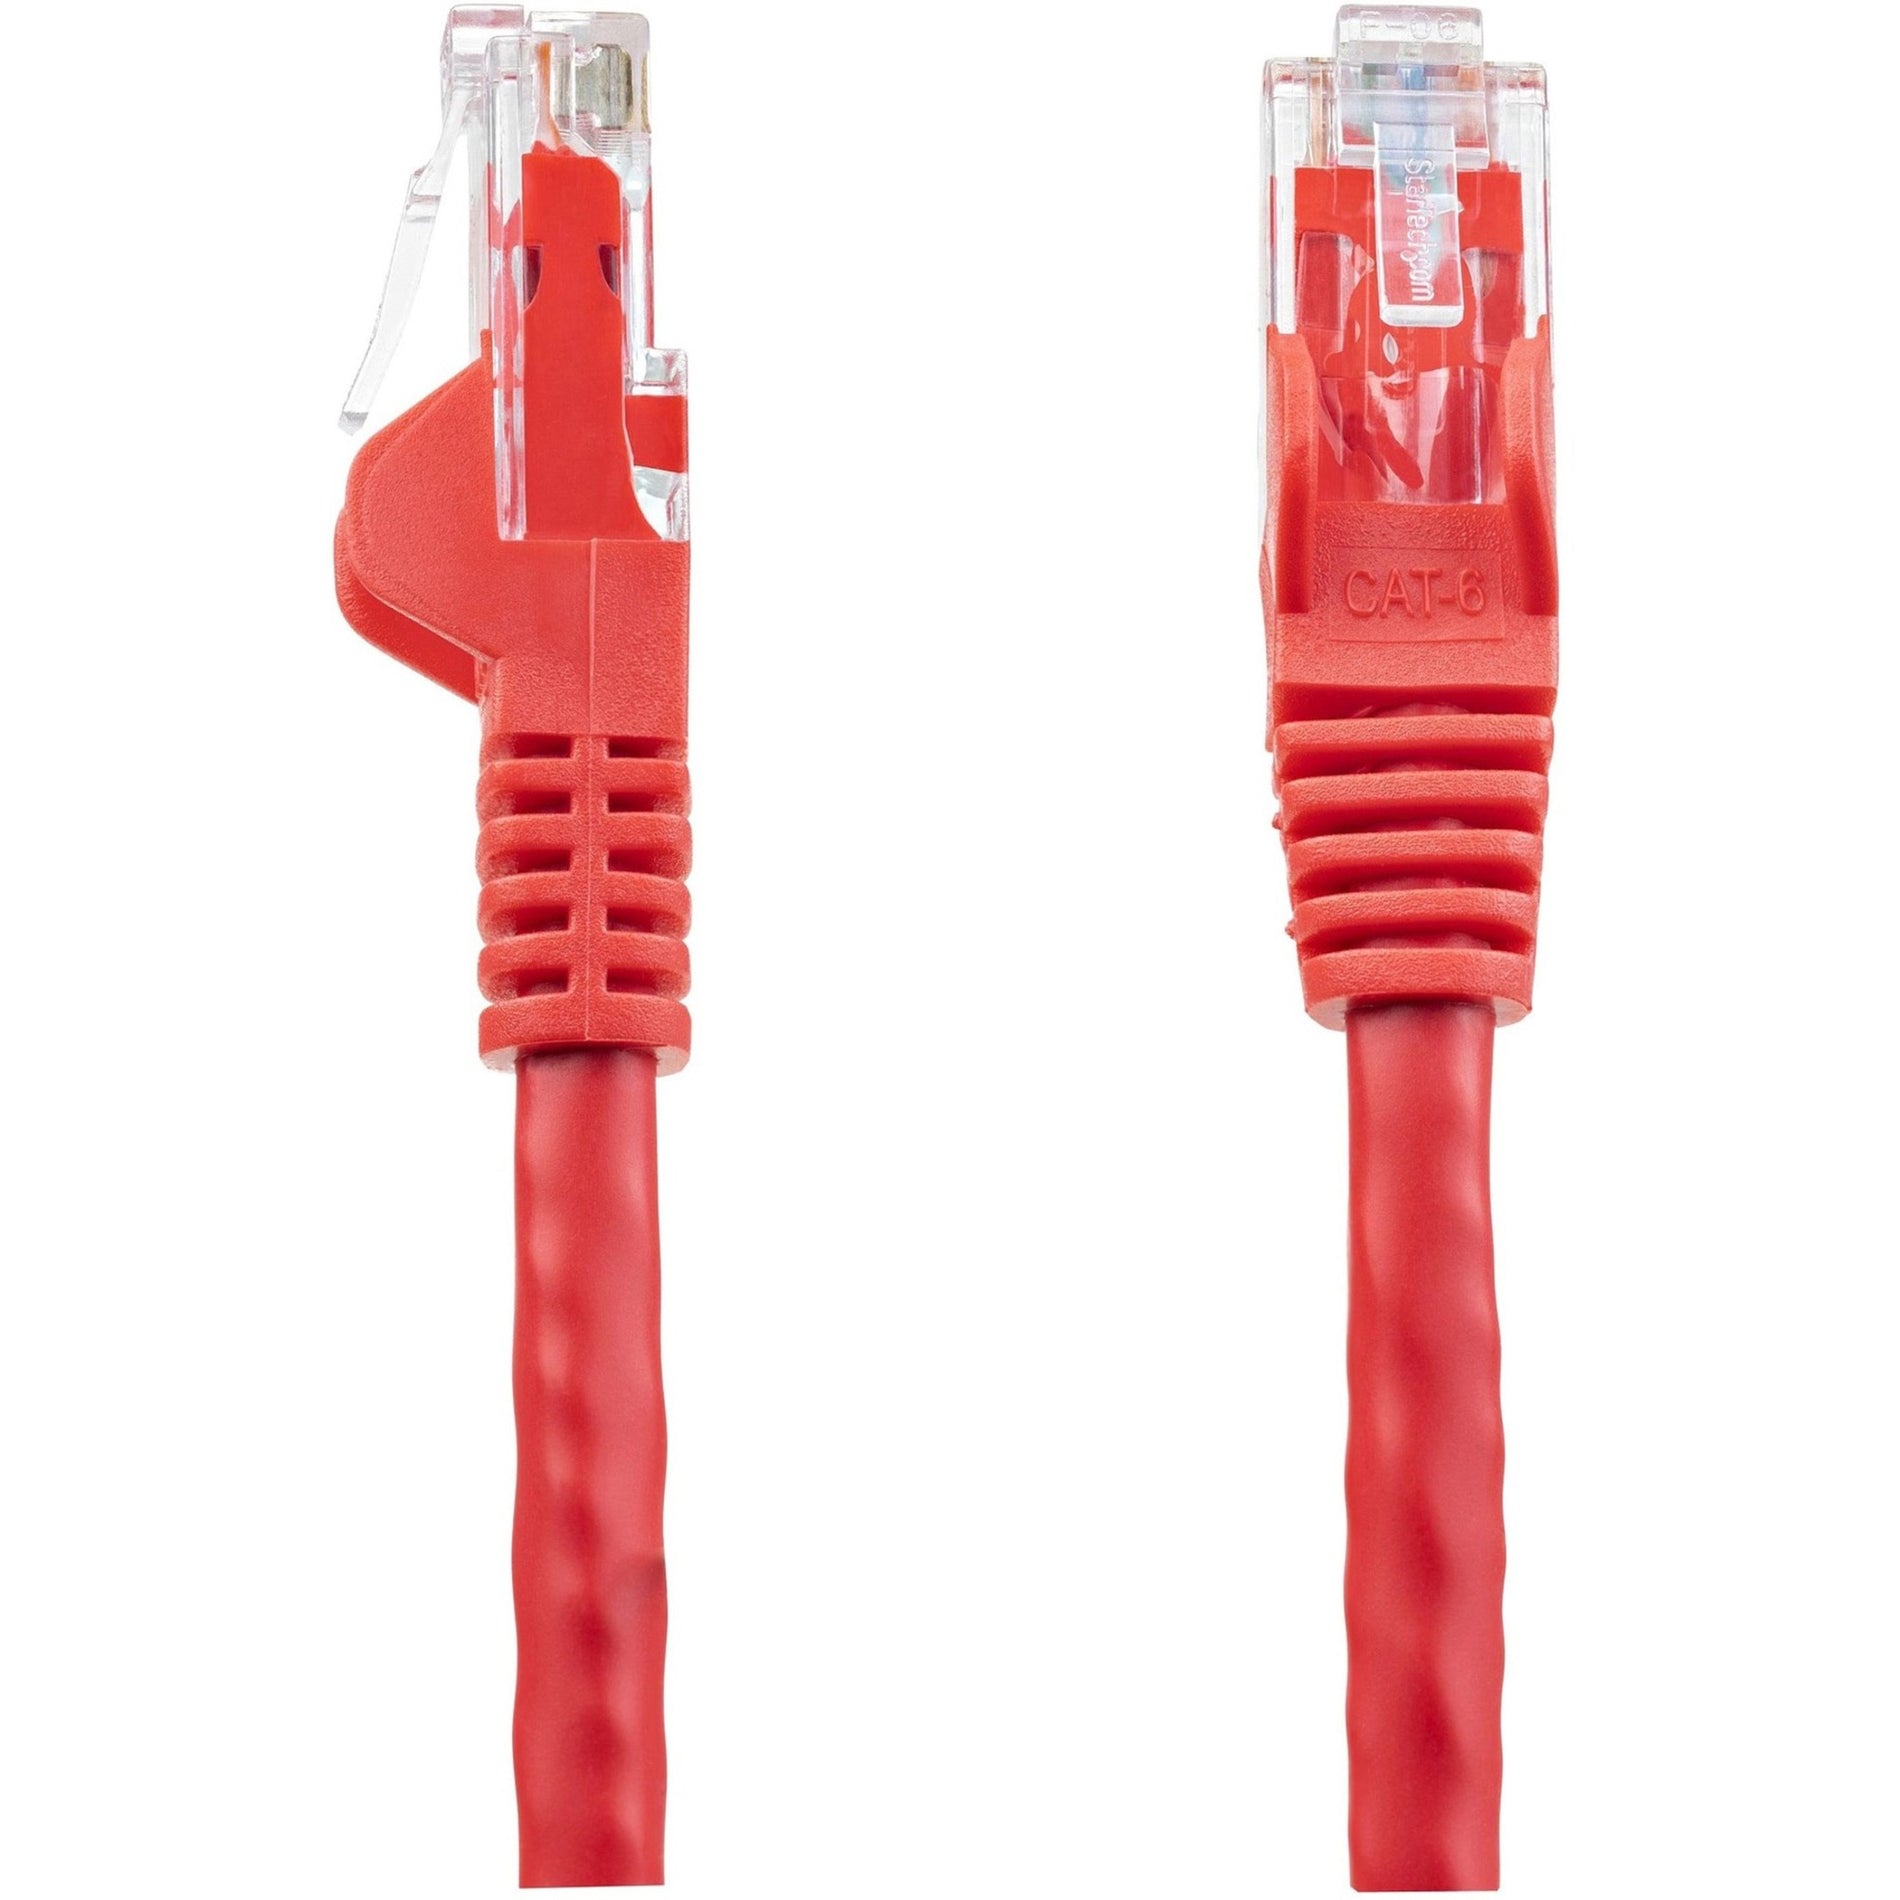 StarTech.com N6PATCH1RD Cat.6 Patch Network Cable, 1ft Red, Snagless RJ45 Connectors